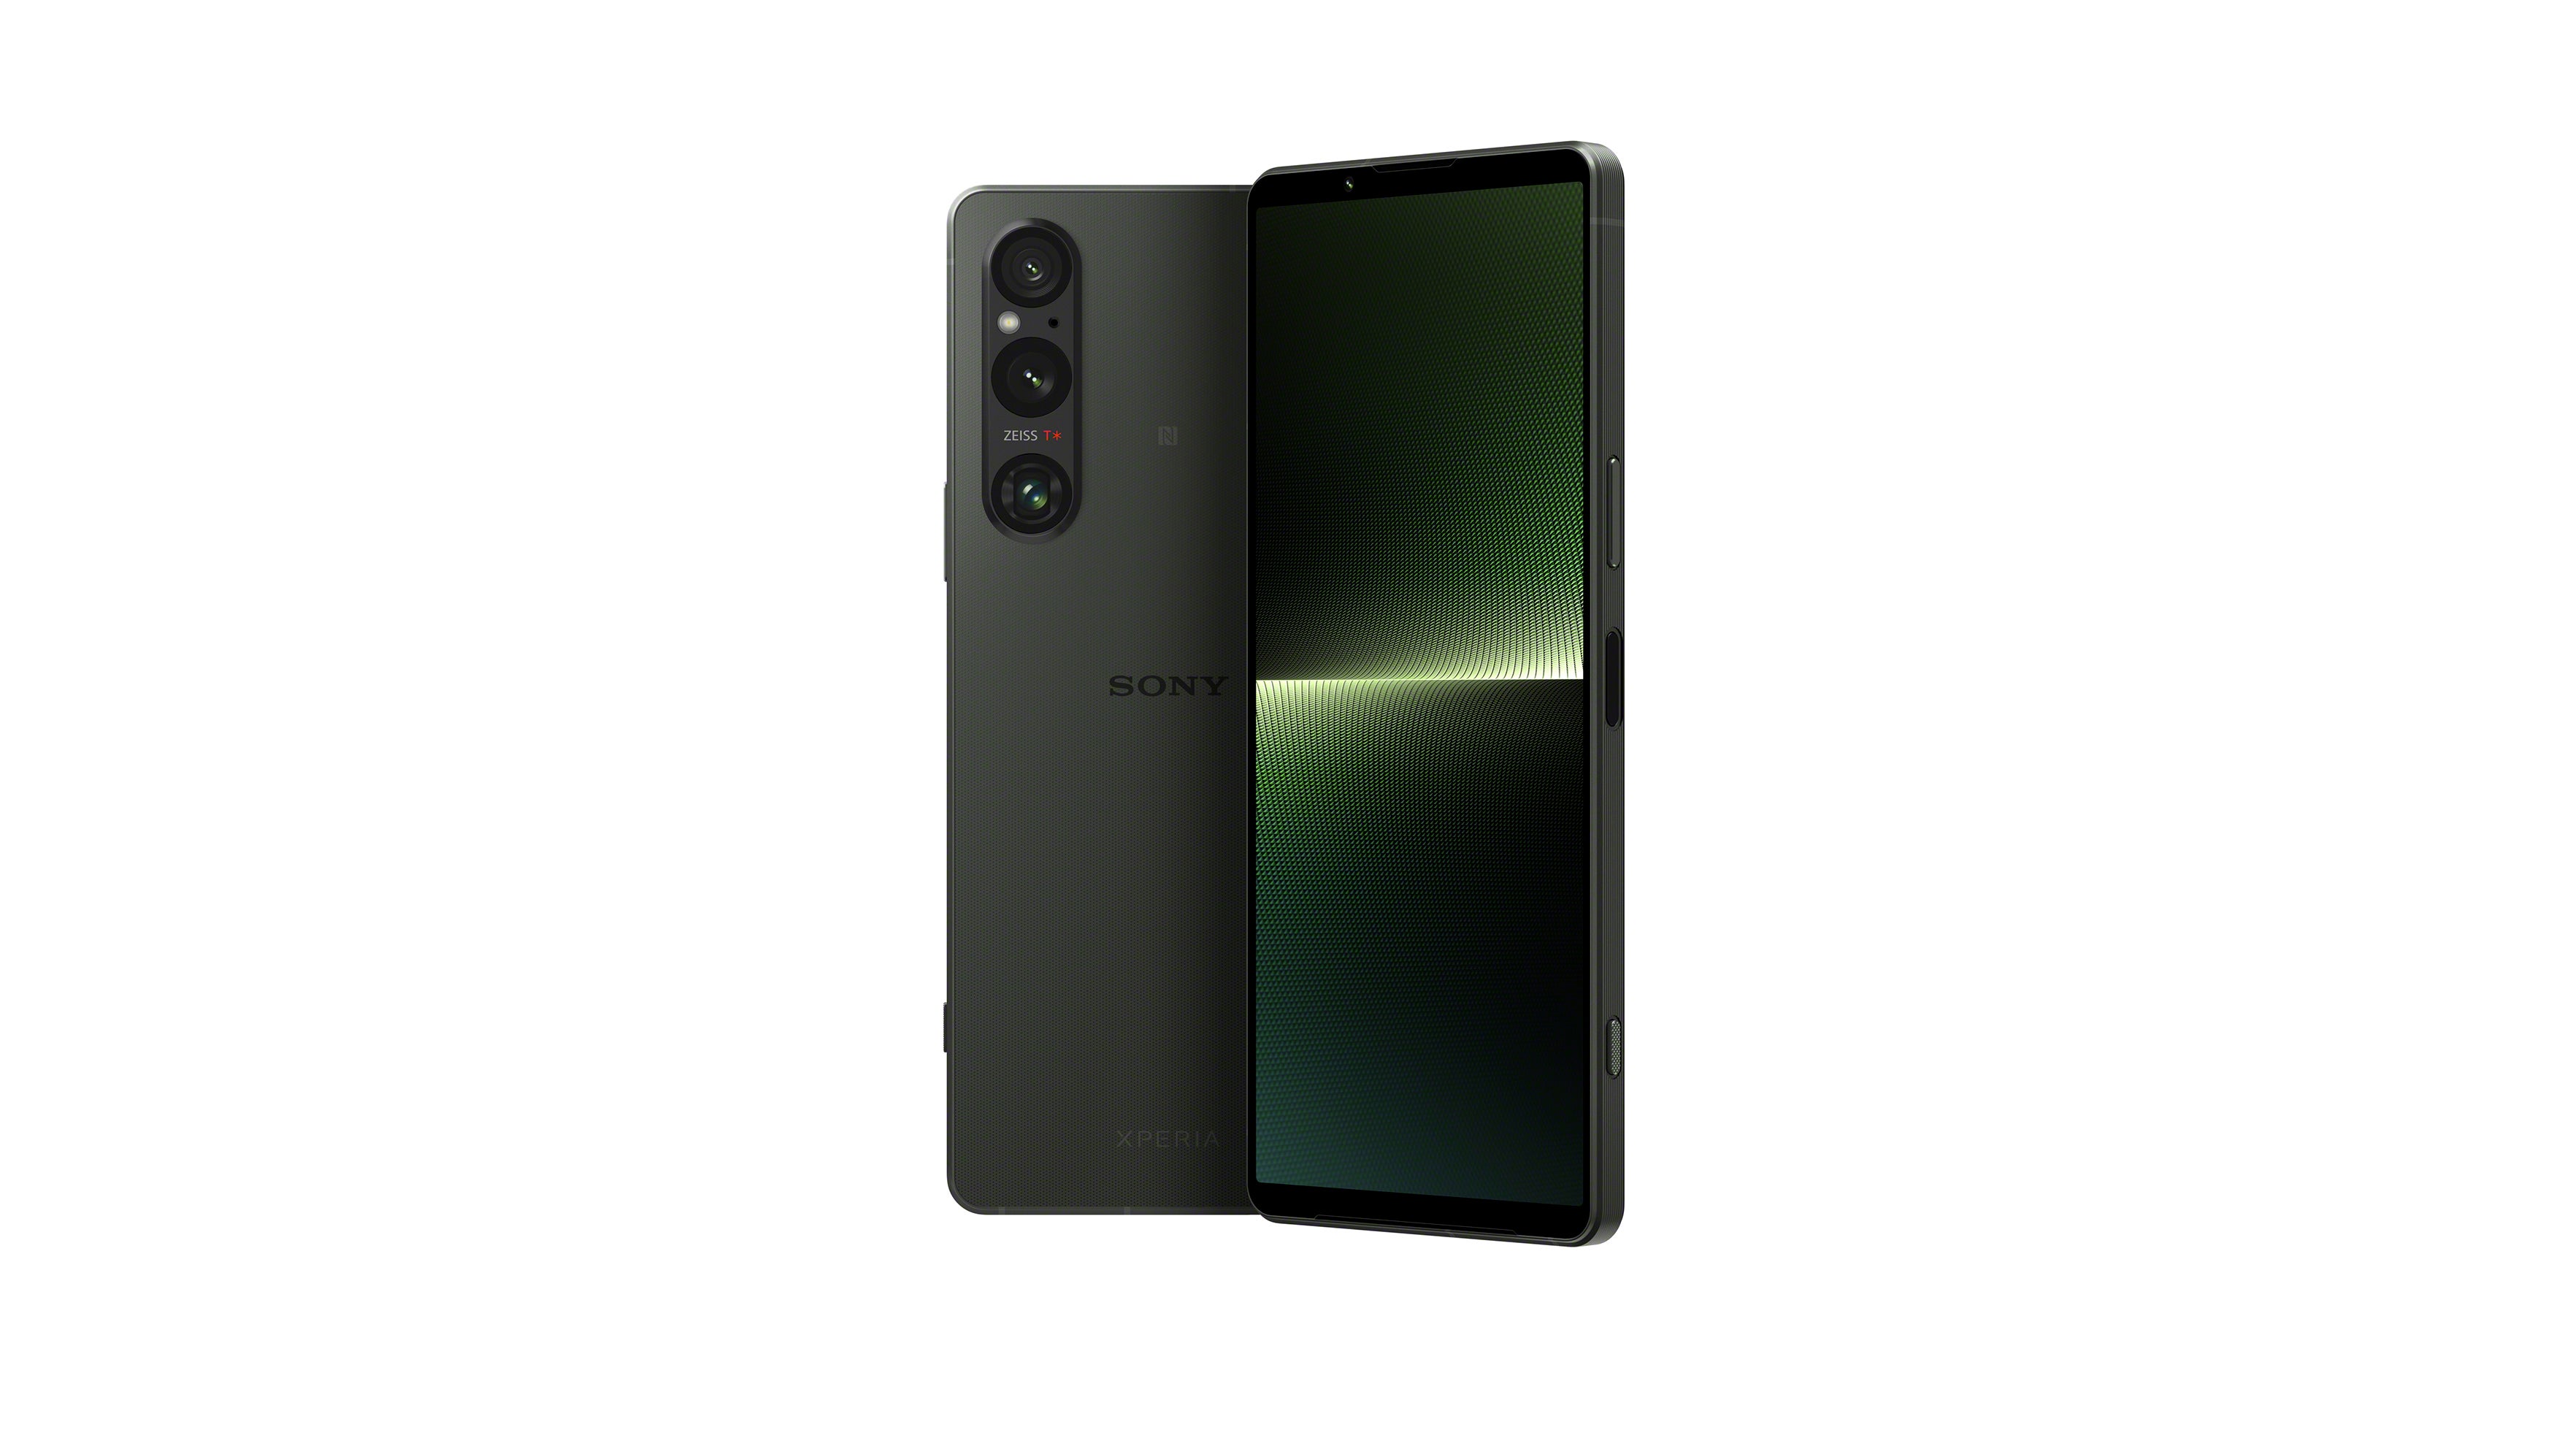 Sony Announces Xperia 1 V Smartphone Featuring Stacked CMOS Image Sensor  with 2-layer Transistor Pixel